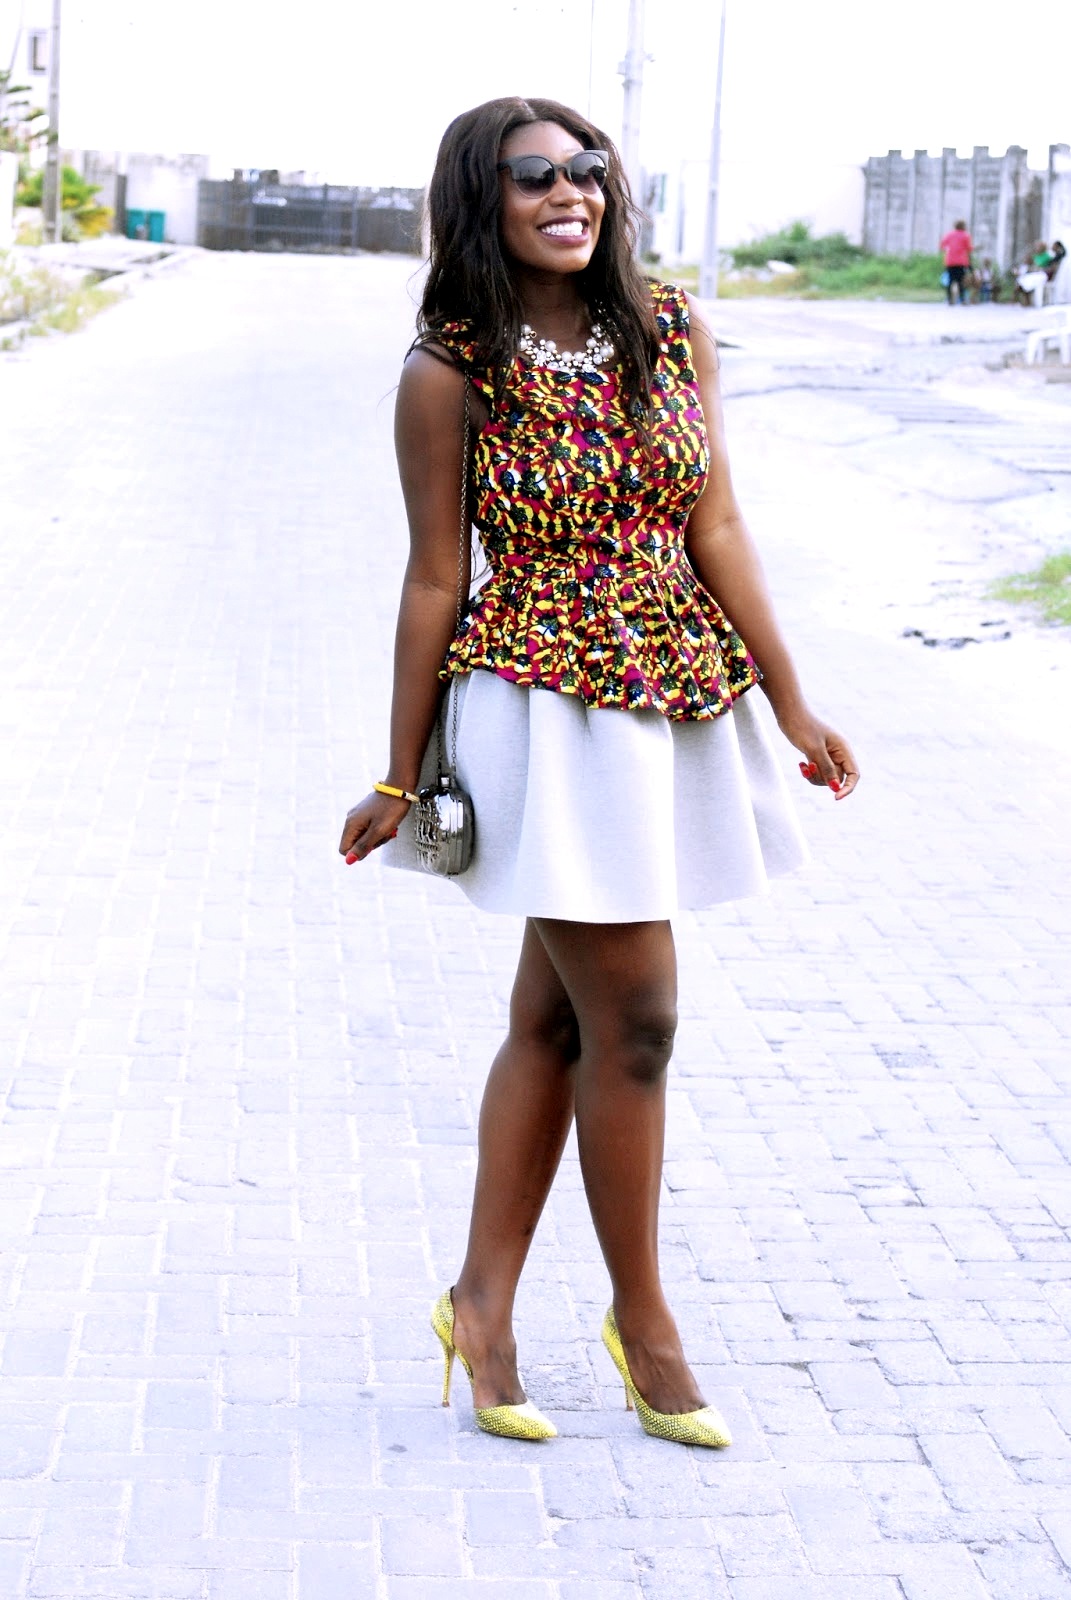 Fashion Bombshell of the Day: Desiree from Lagos – Fashion Bomb Daily